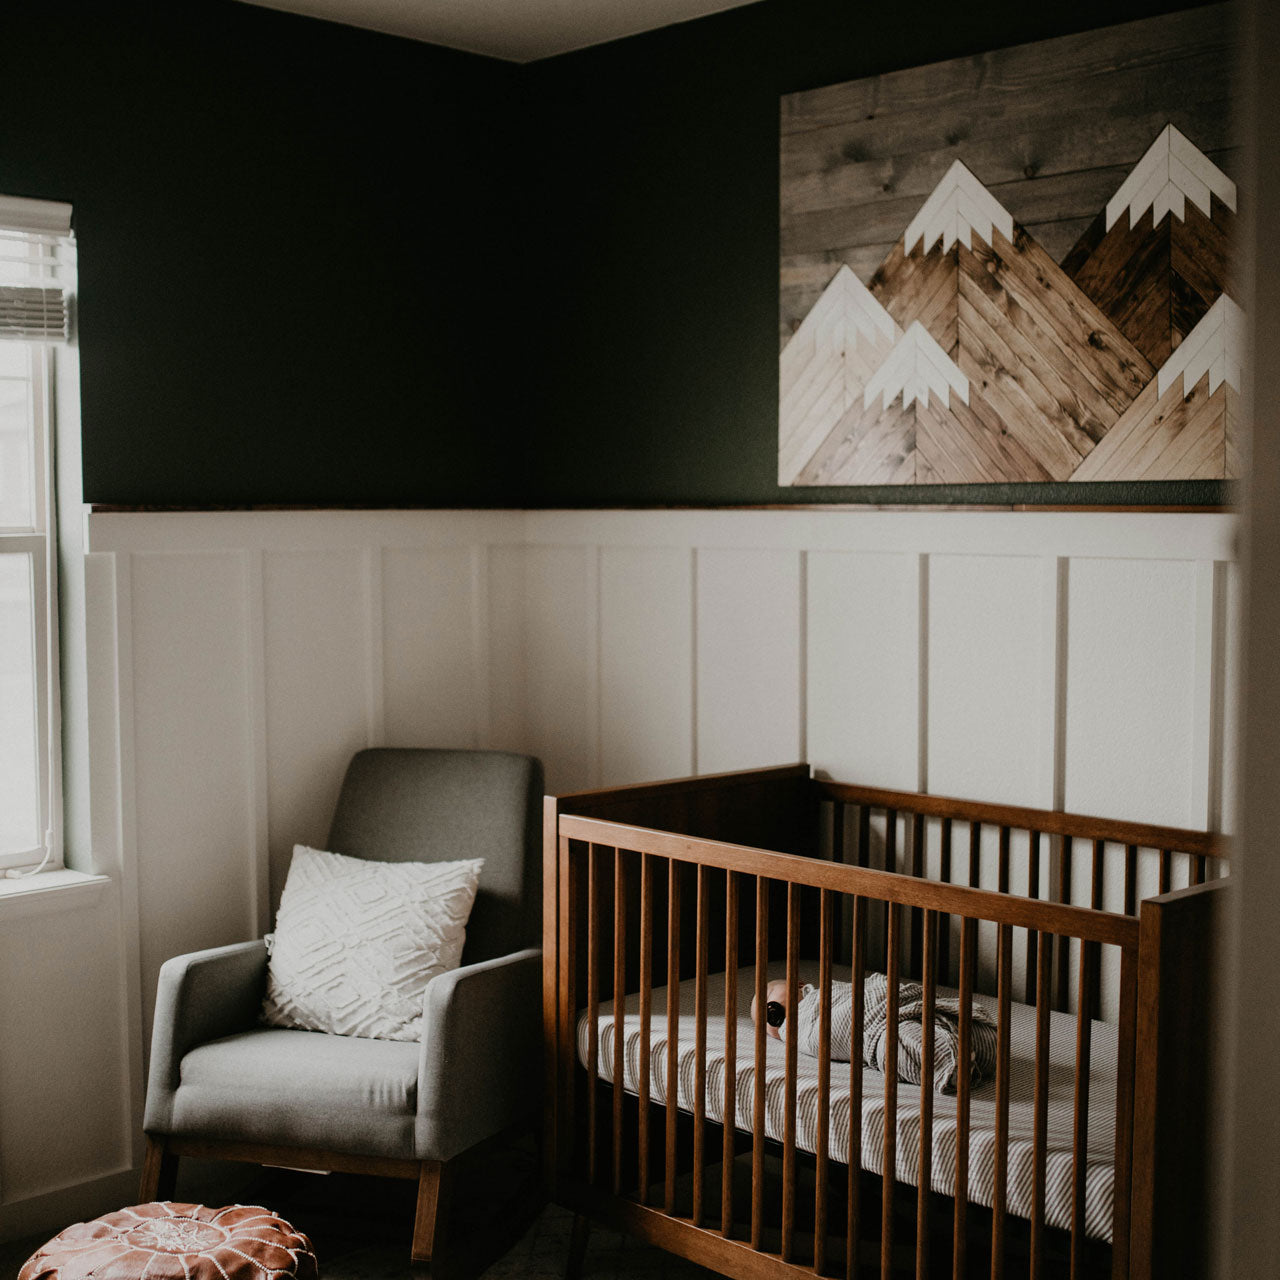 Making Room for Baby: Nursery Inspiration for Nesting Mamas